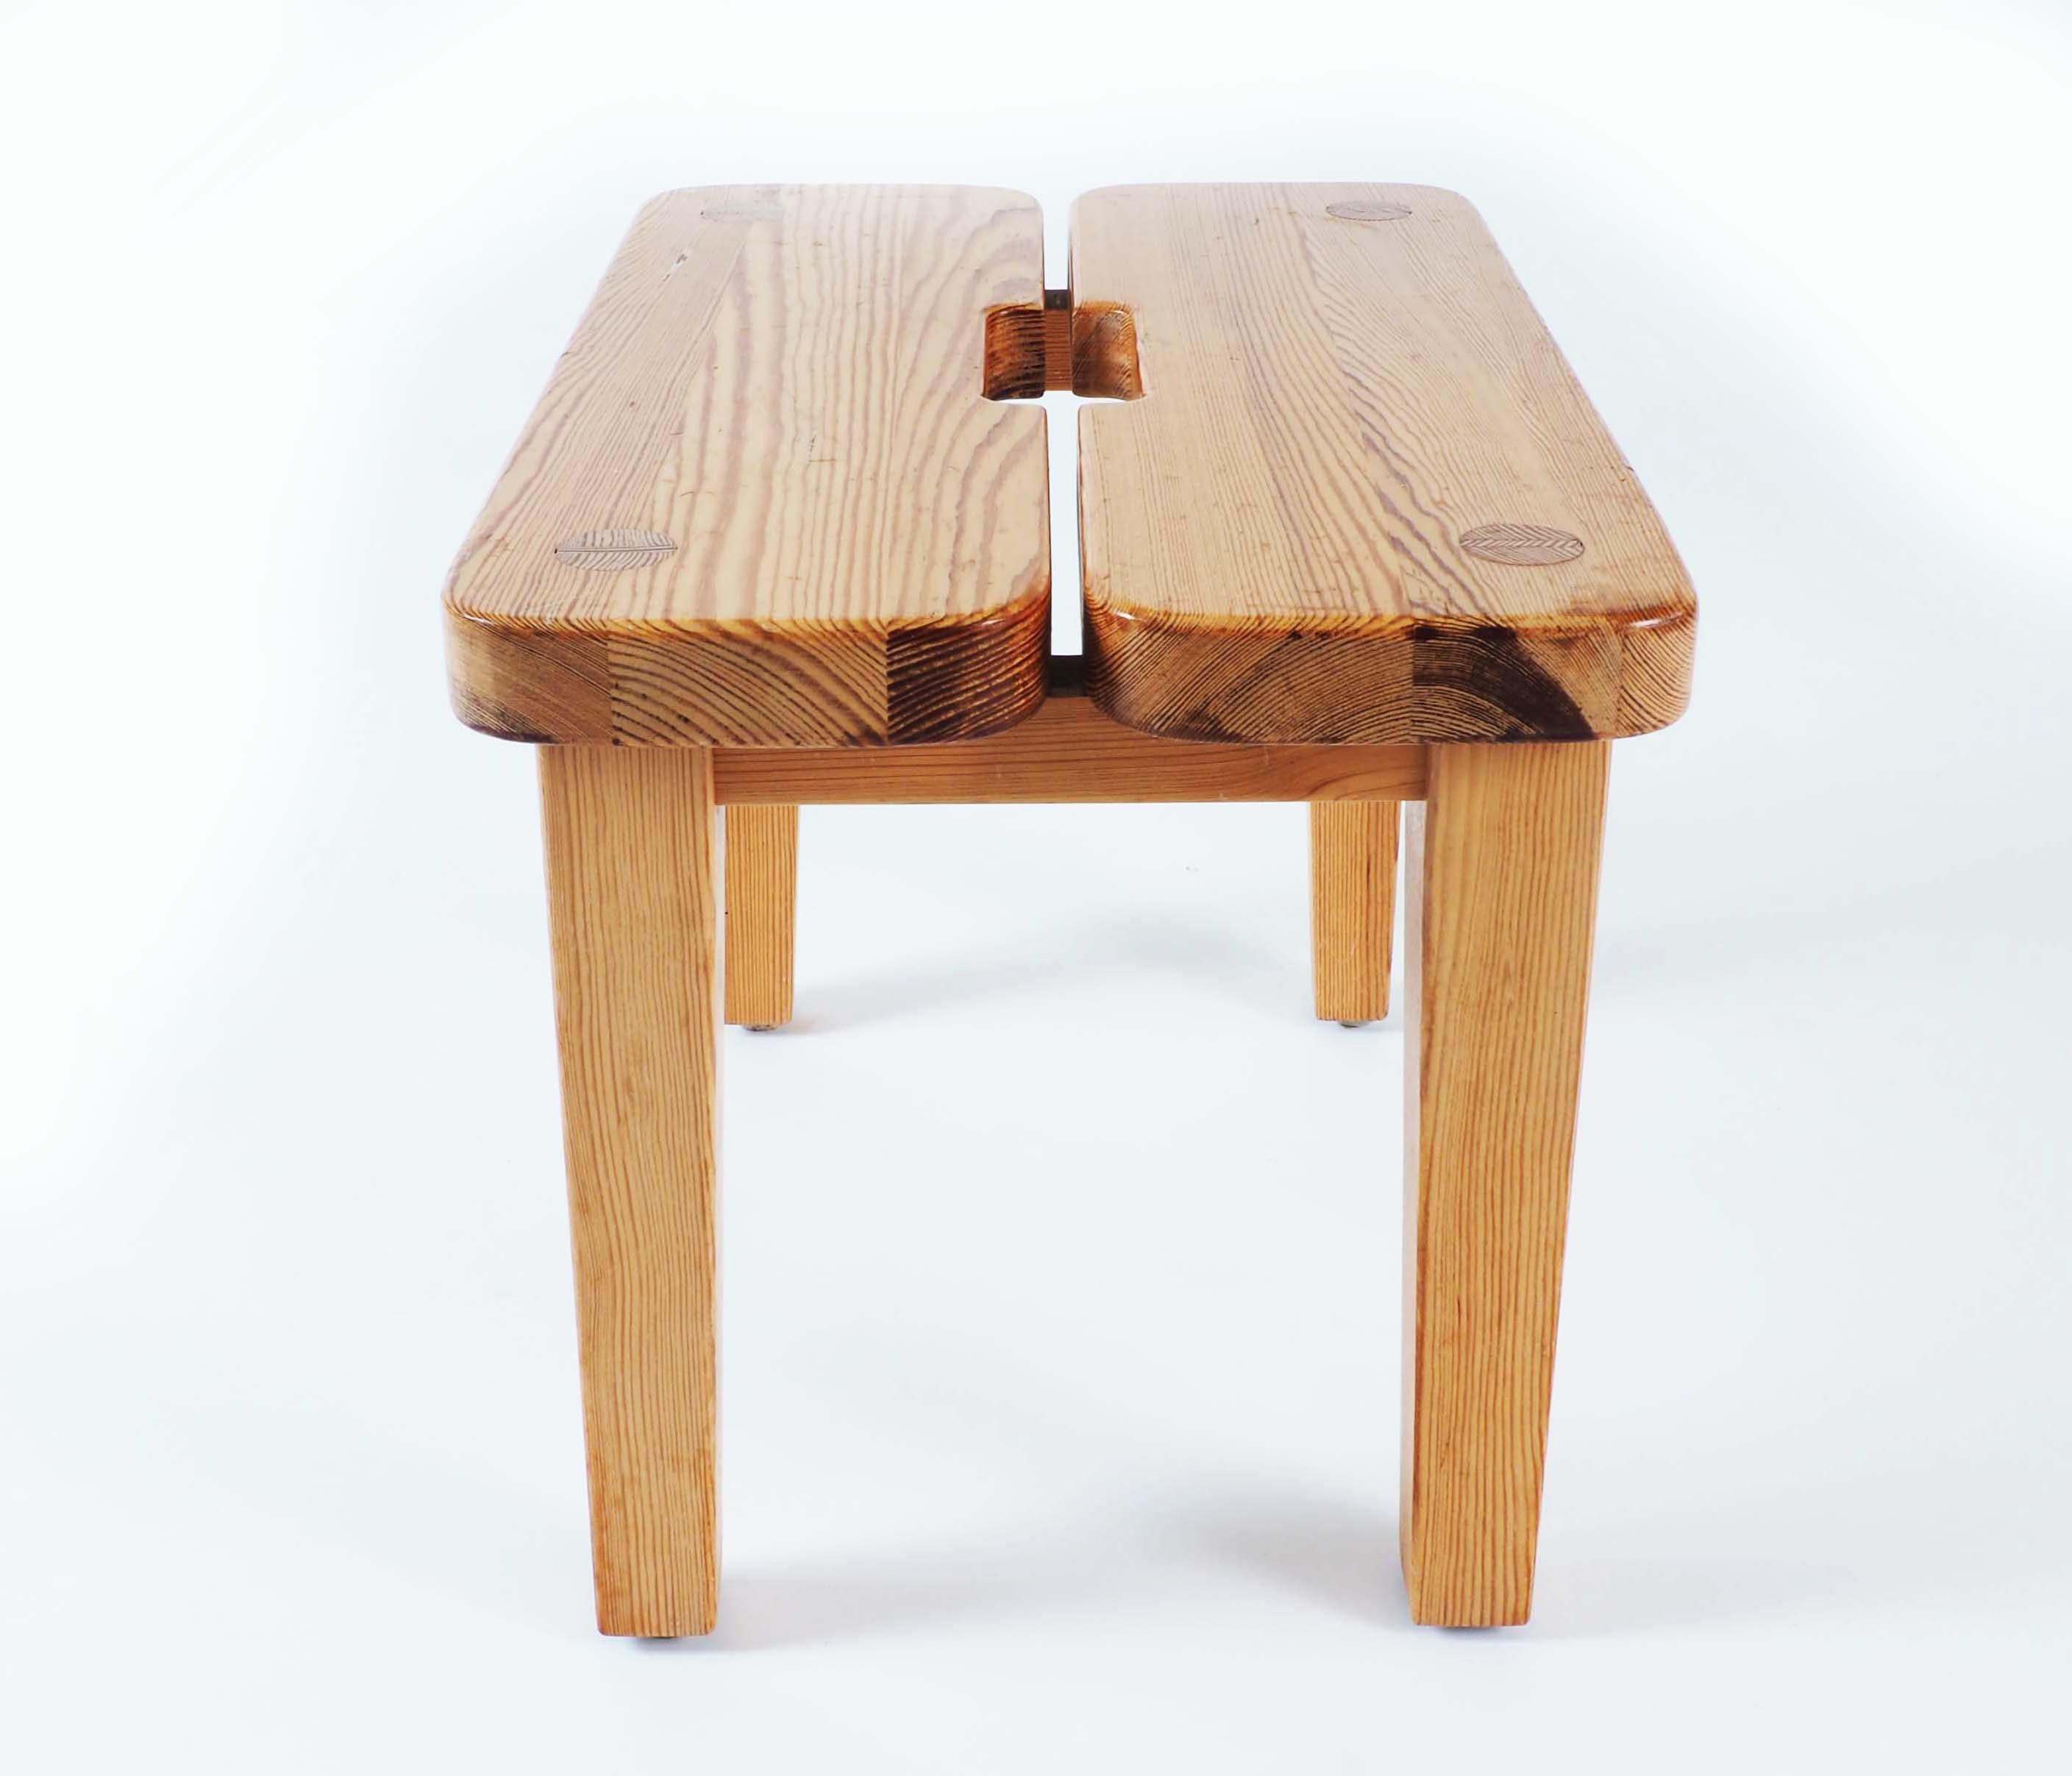 Stools in Massive Pine, Sweden, 1970s For Sale 2